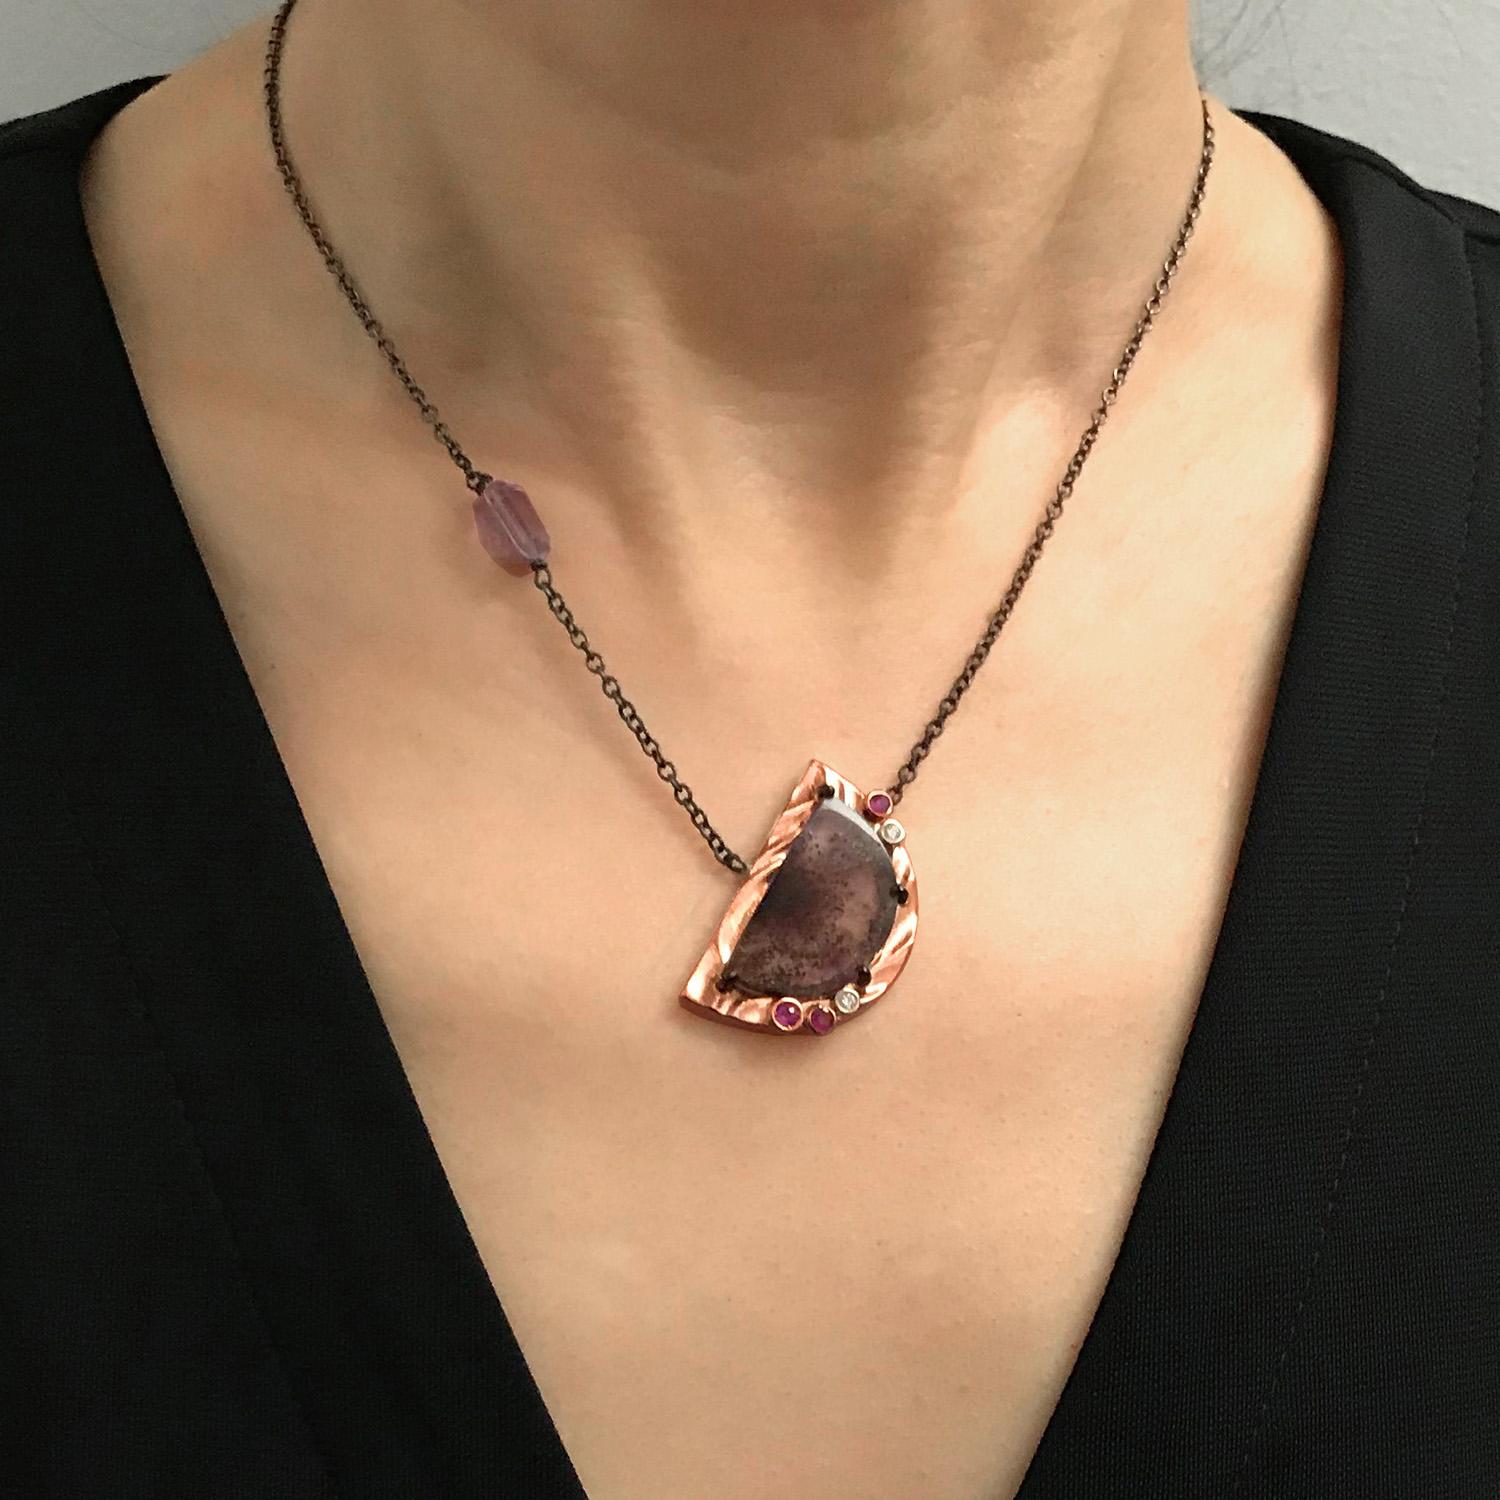 K.Mita’s remarkable Purple Moon Pendant, which is created from a half-moon shaped cacoxenite amethyst quartz with beautiful natural inclusions, is surrounded by a rim of 14k rose gold with K.Mita’s distinctive Sand Dune texture and accented with